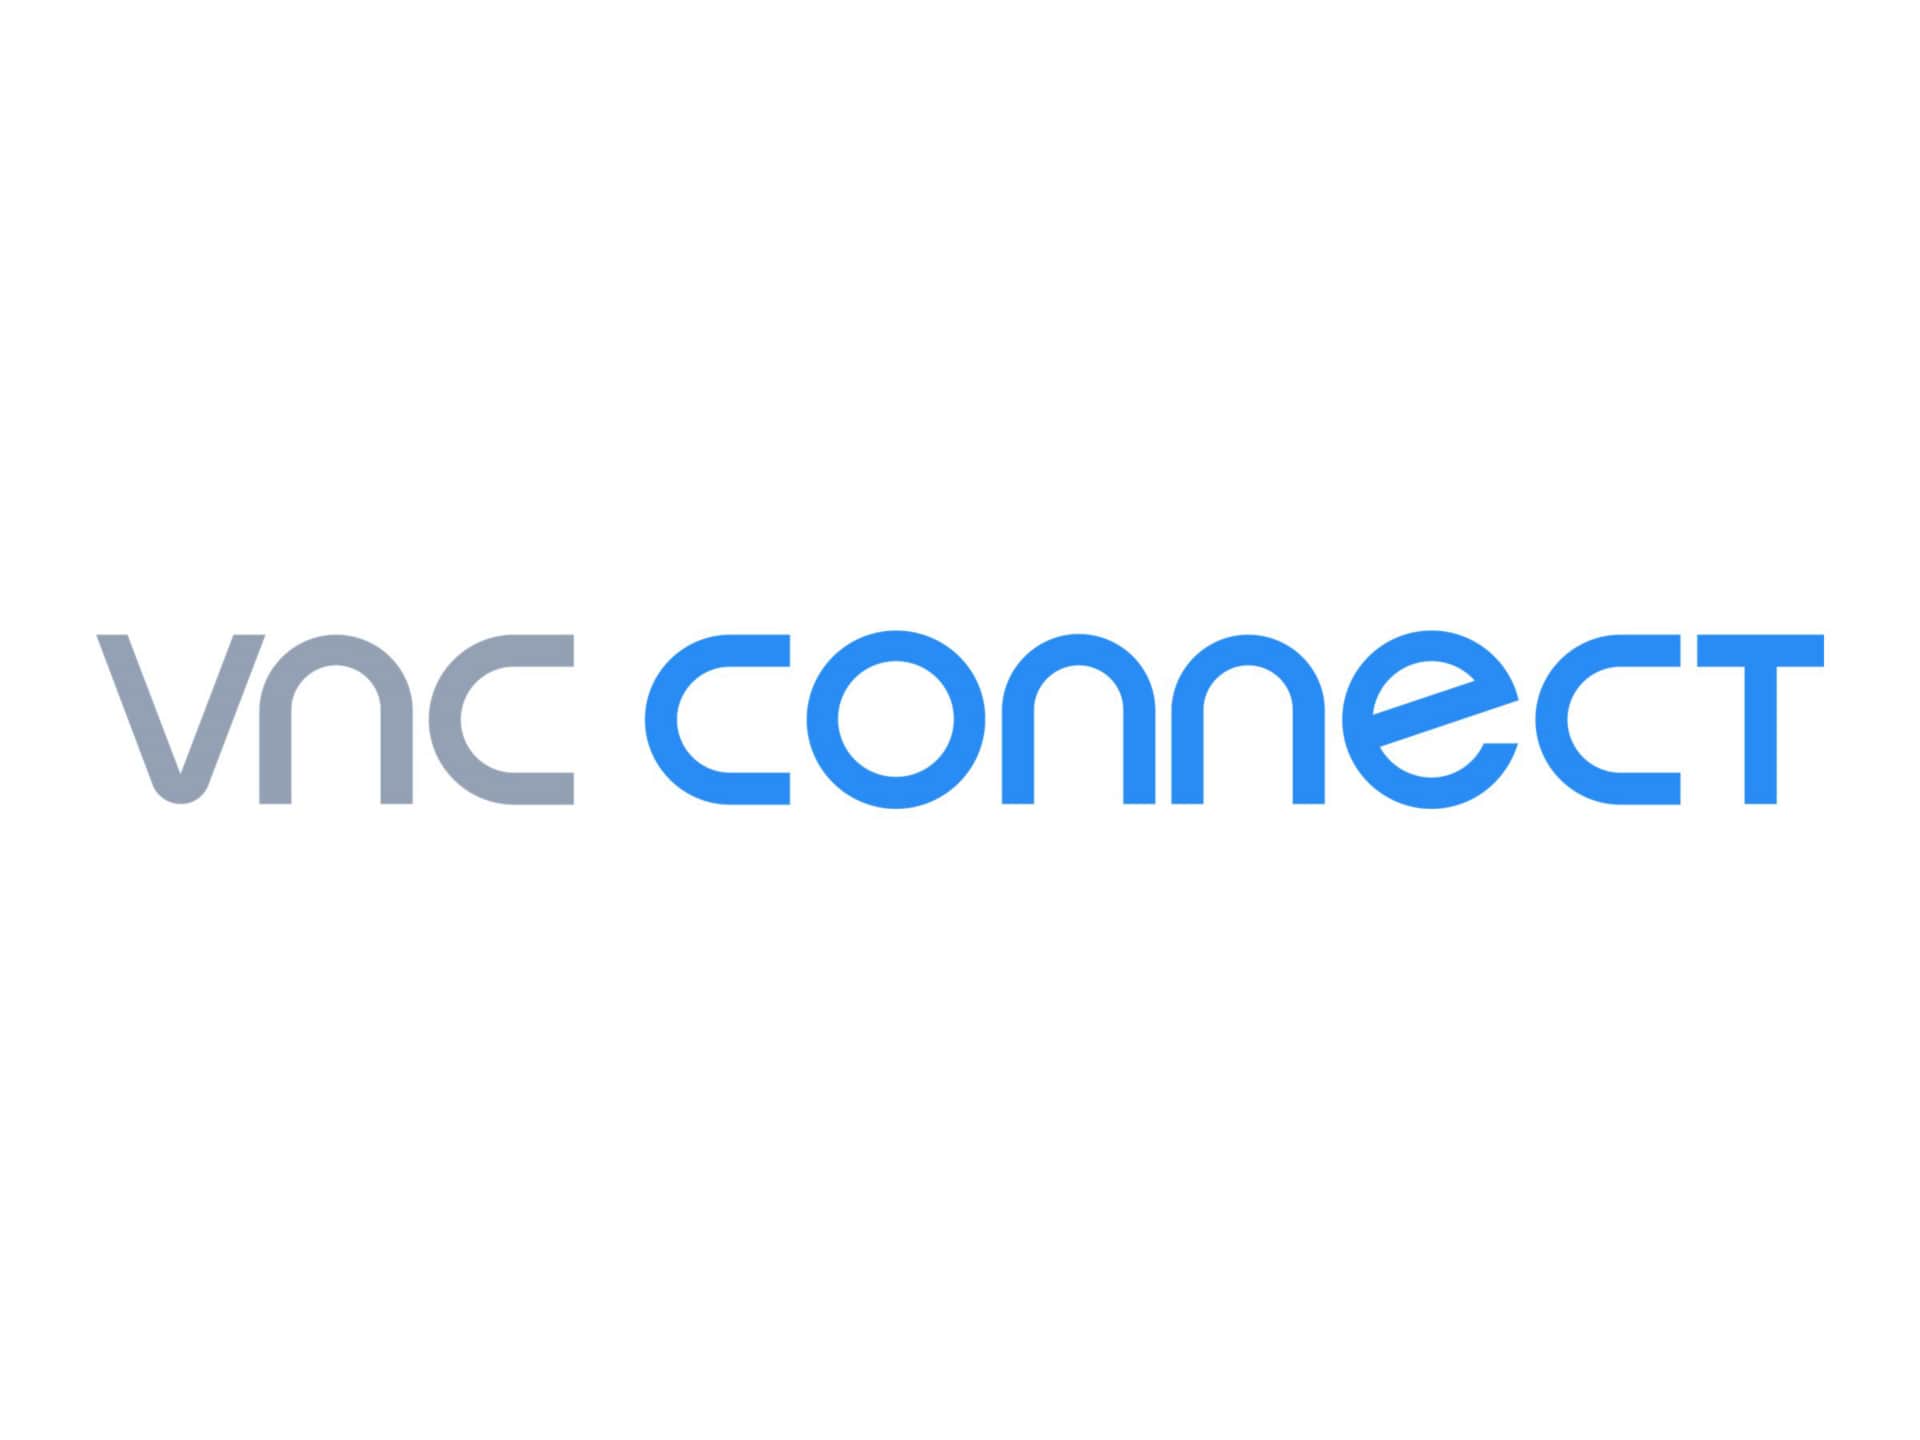 VNC Connect Professional - subscription license (1 year) - unlimited users,